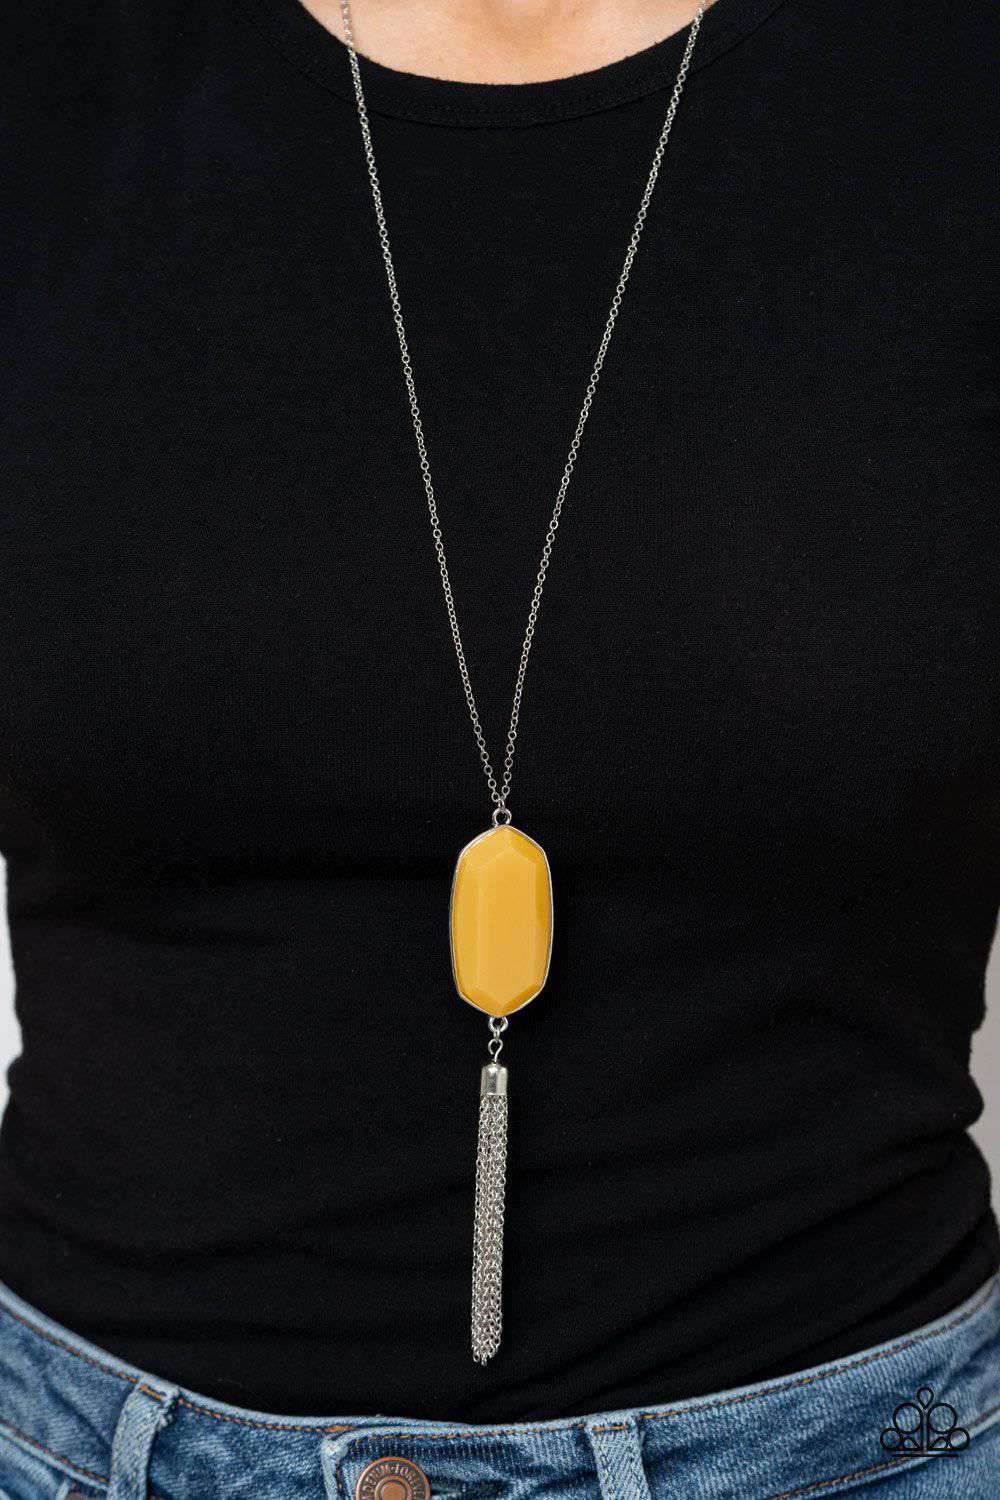 A207 - Got A Good Thing GLOWING, Yellow Necklace by Paparazzi Accessories on Fancy5Fashion.com